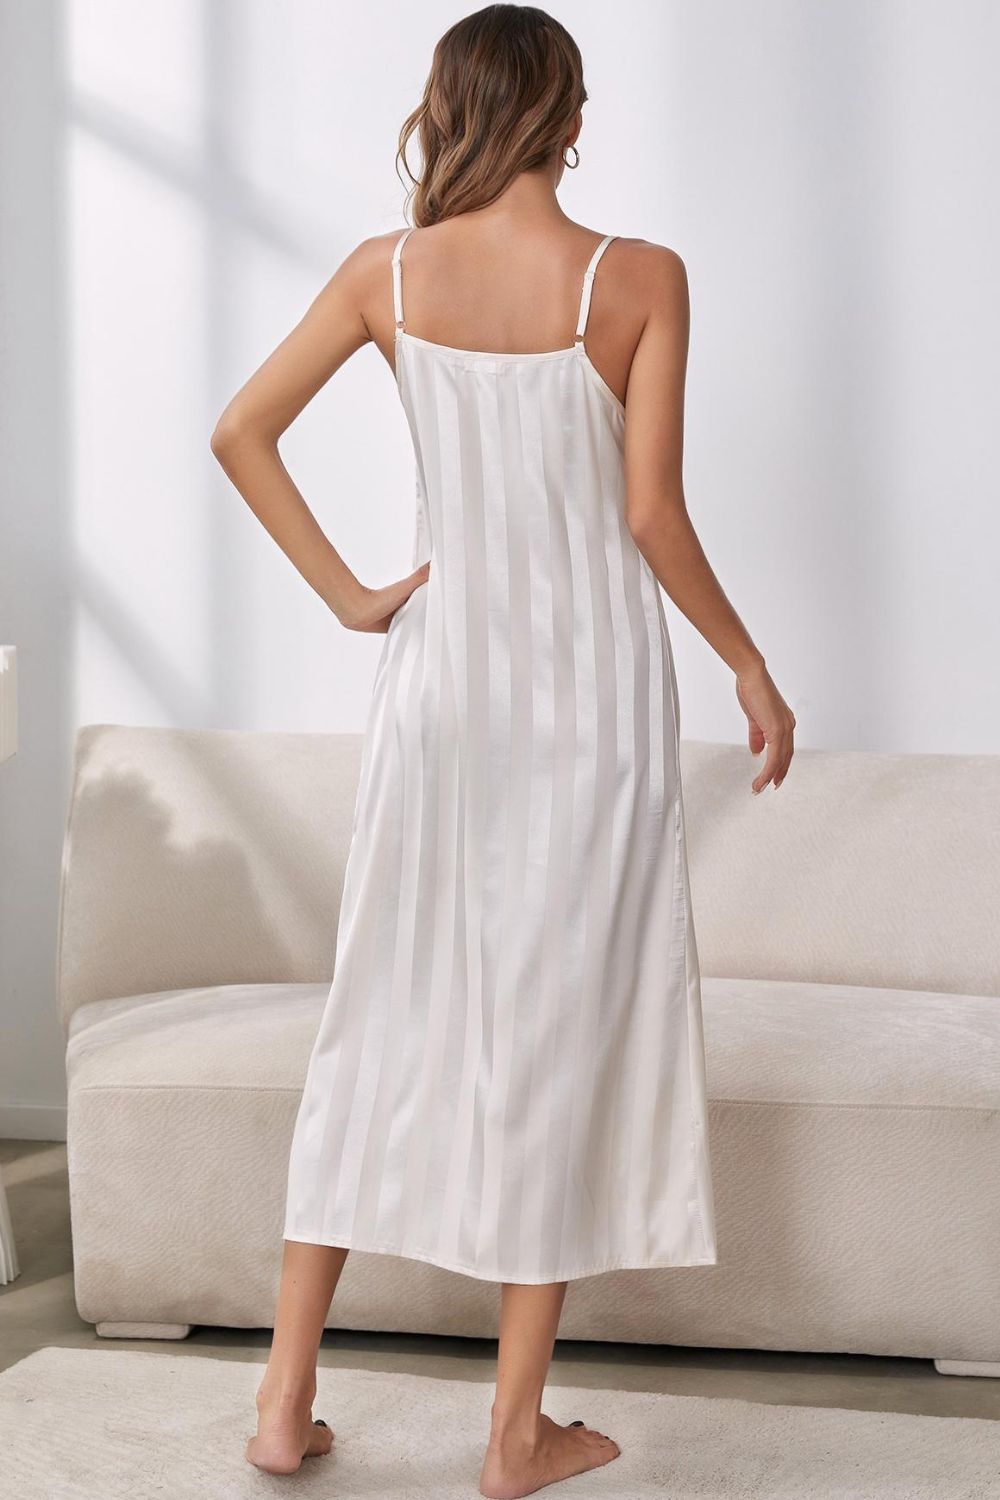 Villa Blvd Striped Open Front Robe + Cami Dress Set ☛ Multiple Colors Available ☚